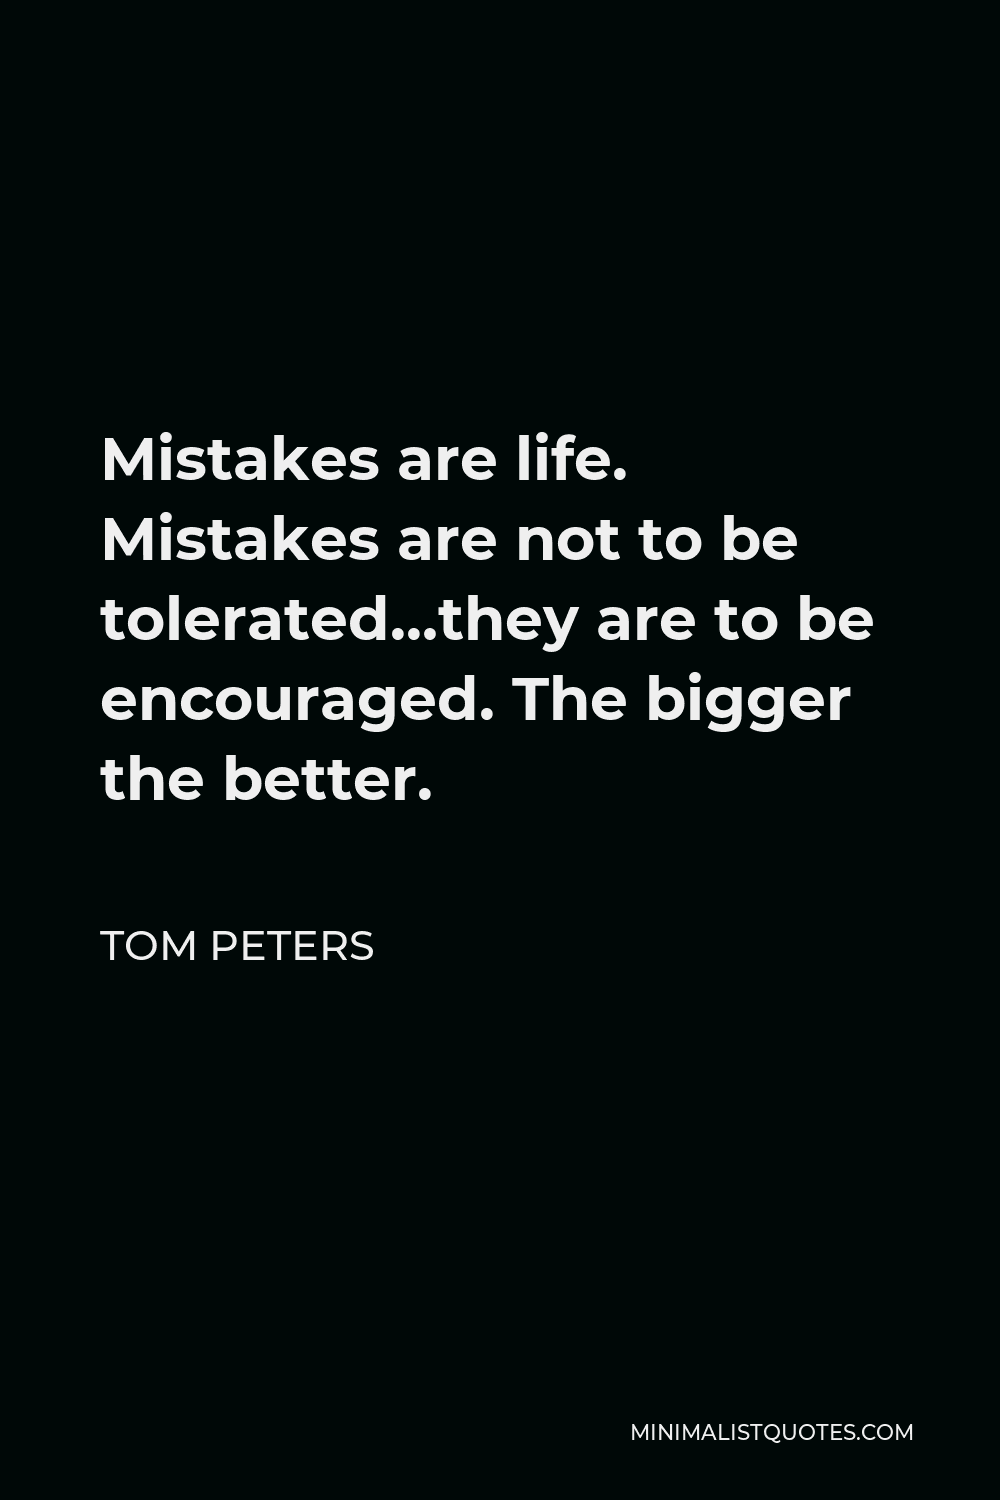 Tom Peters Quote - Mistakes are life. Mistakes are not to be tolerated…they are to be encouraged. The bigger the better.